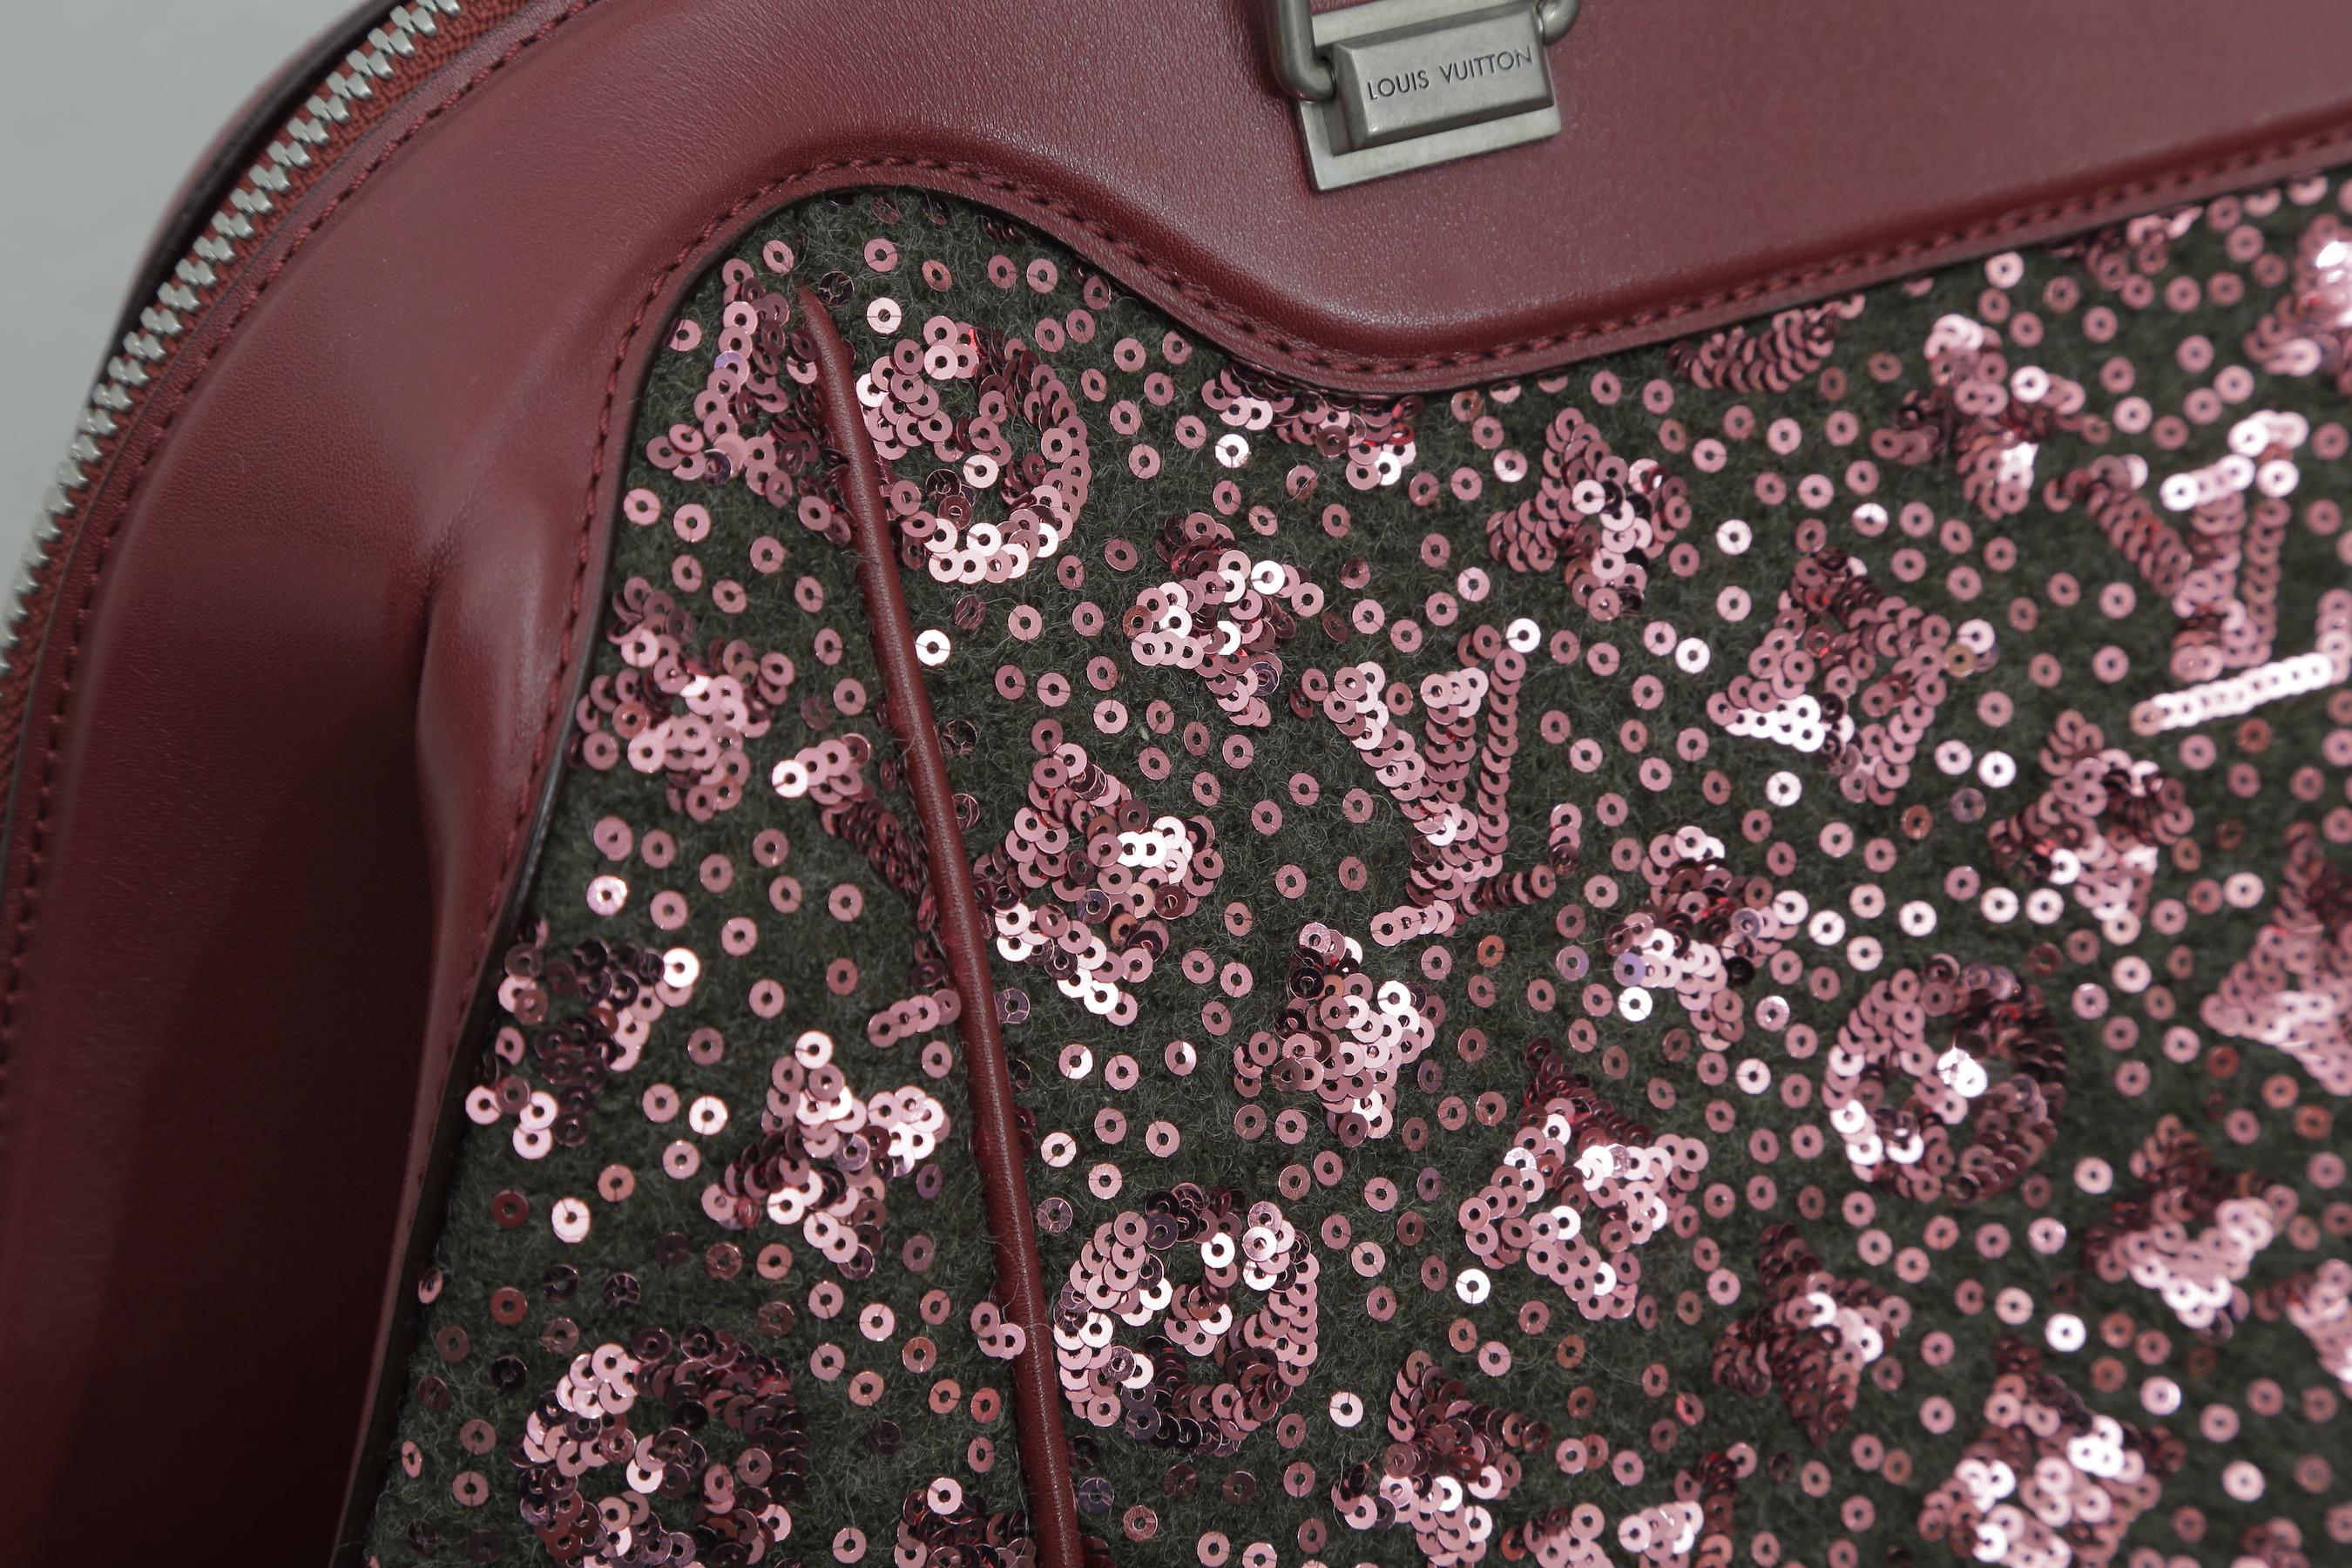 Sunshine Winter 2012 Limited Edition Express North South Burgundy Leather Sequin 3